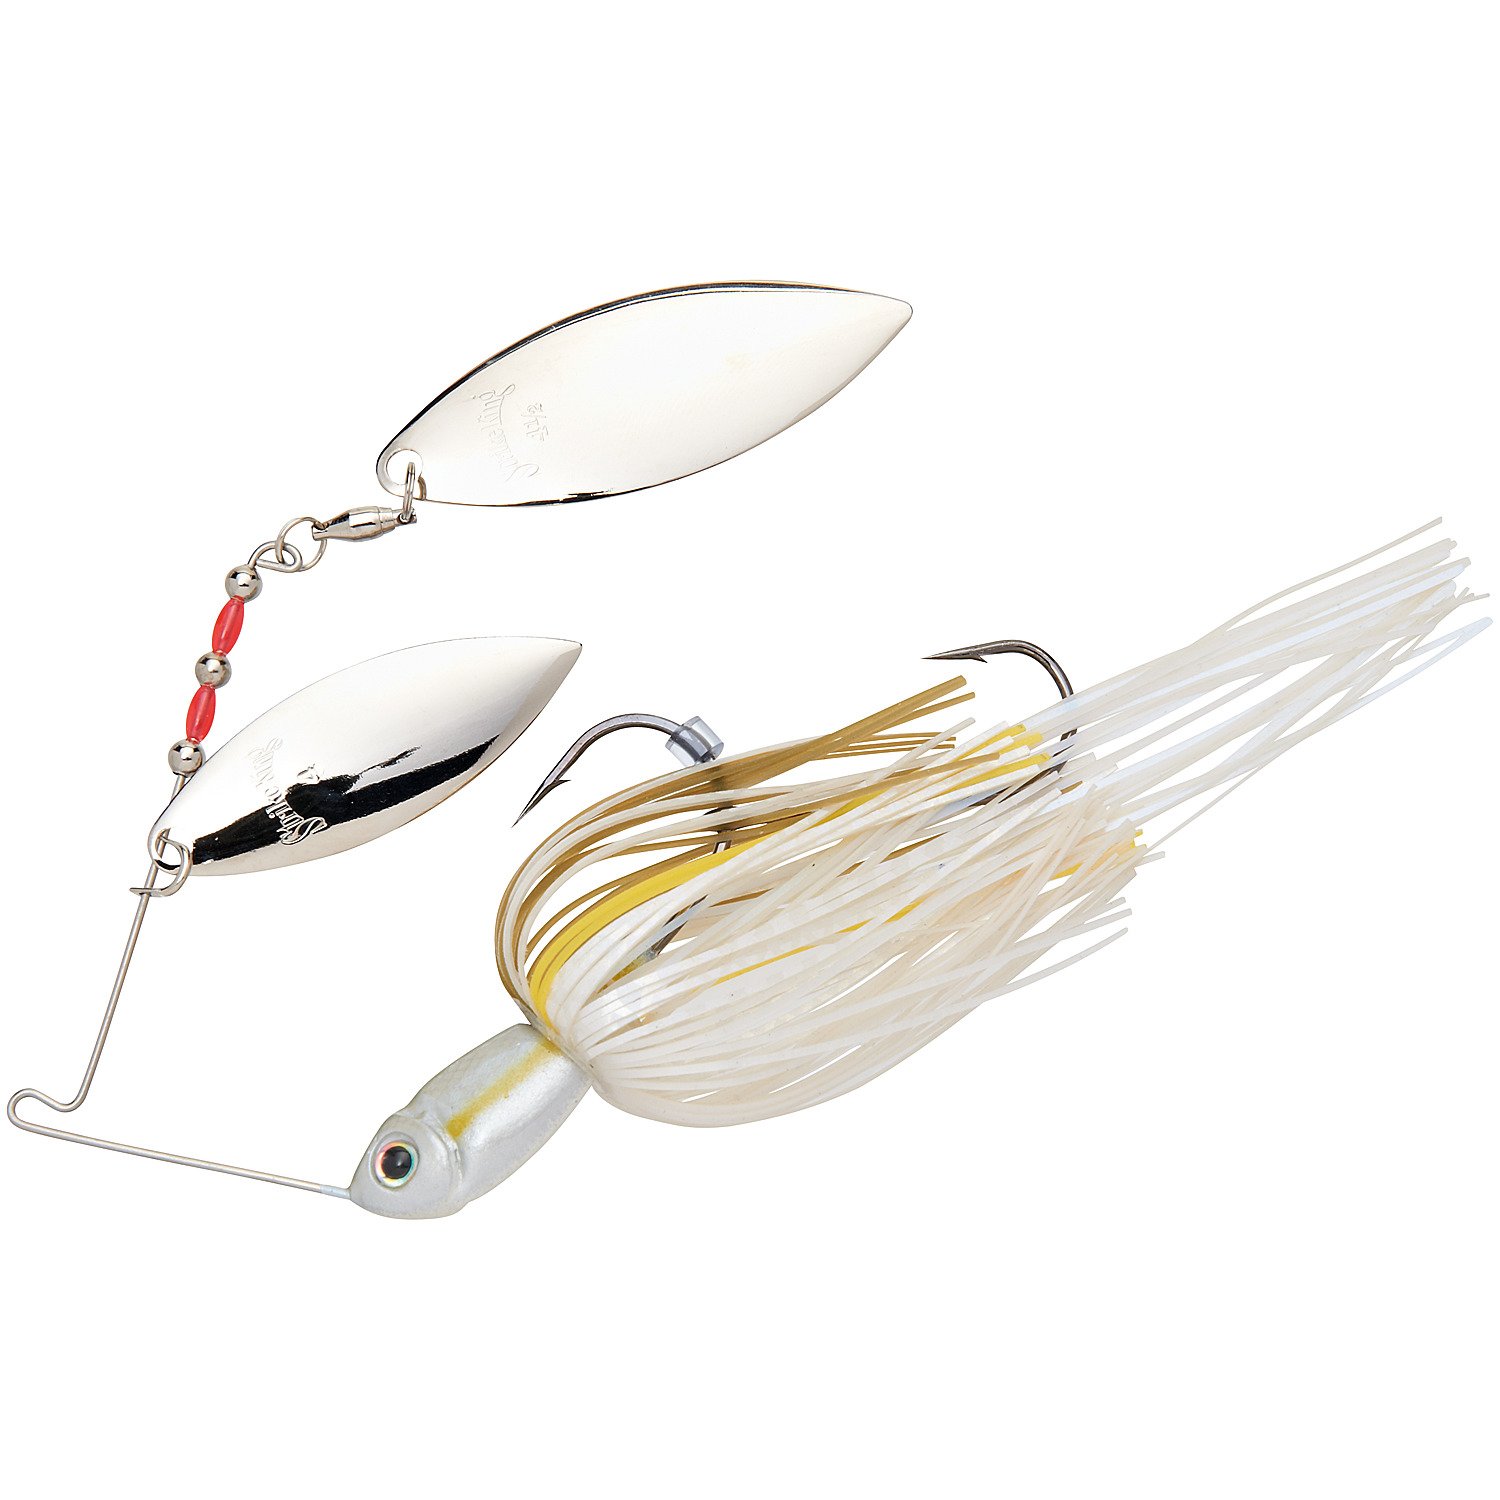 Strike King Premier Plus 1/2 oz Double Willow Blade Spinnerbait - view number 1